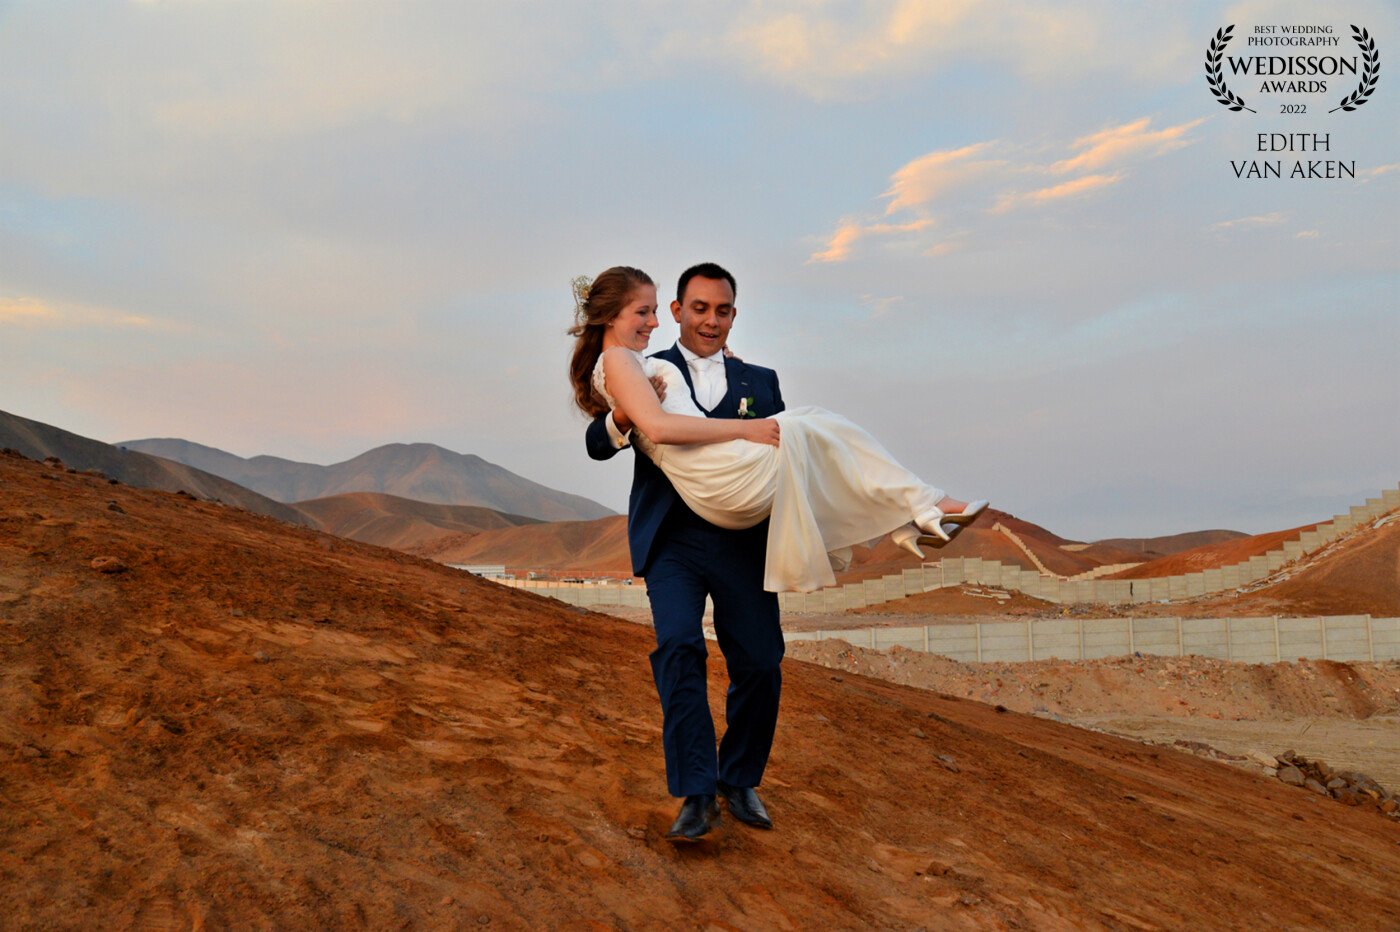 This couple married in the beautiful country Peru. Just a few hours from the big city Lima.<br />
The ceremonie was on a beach and we did a loveshoot in the harbor. <br />
After the ceremonie and reception I suggested to go to the mountains nearby for a golden hour shoot.<br />
The bride worried about the sand getting on her dress, so the groom lifted her up.<br />
That's when I got this wonderful shot!